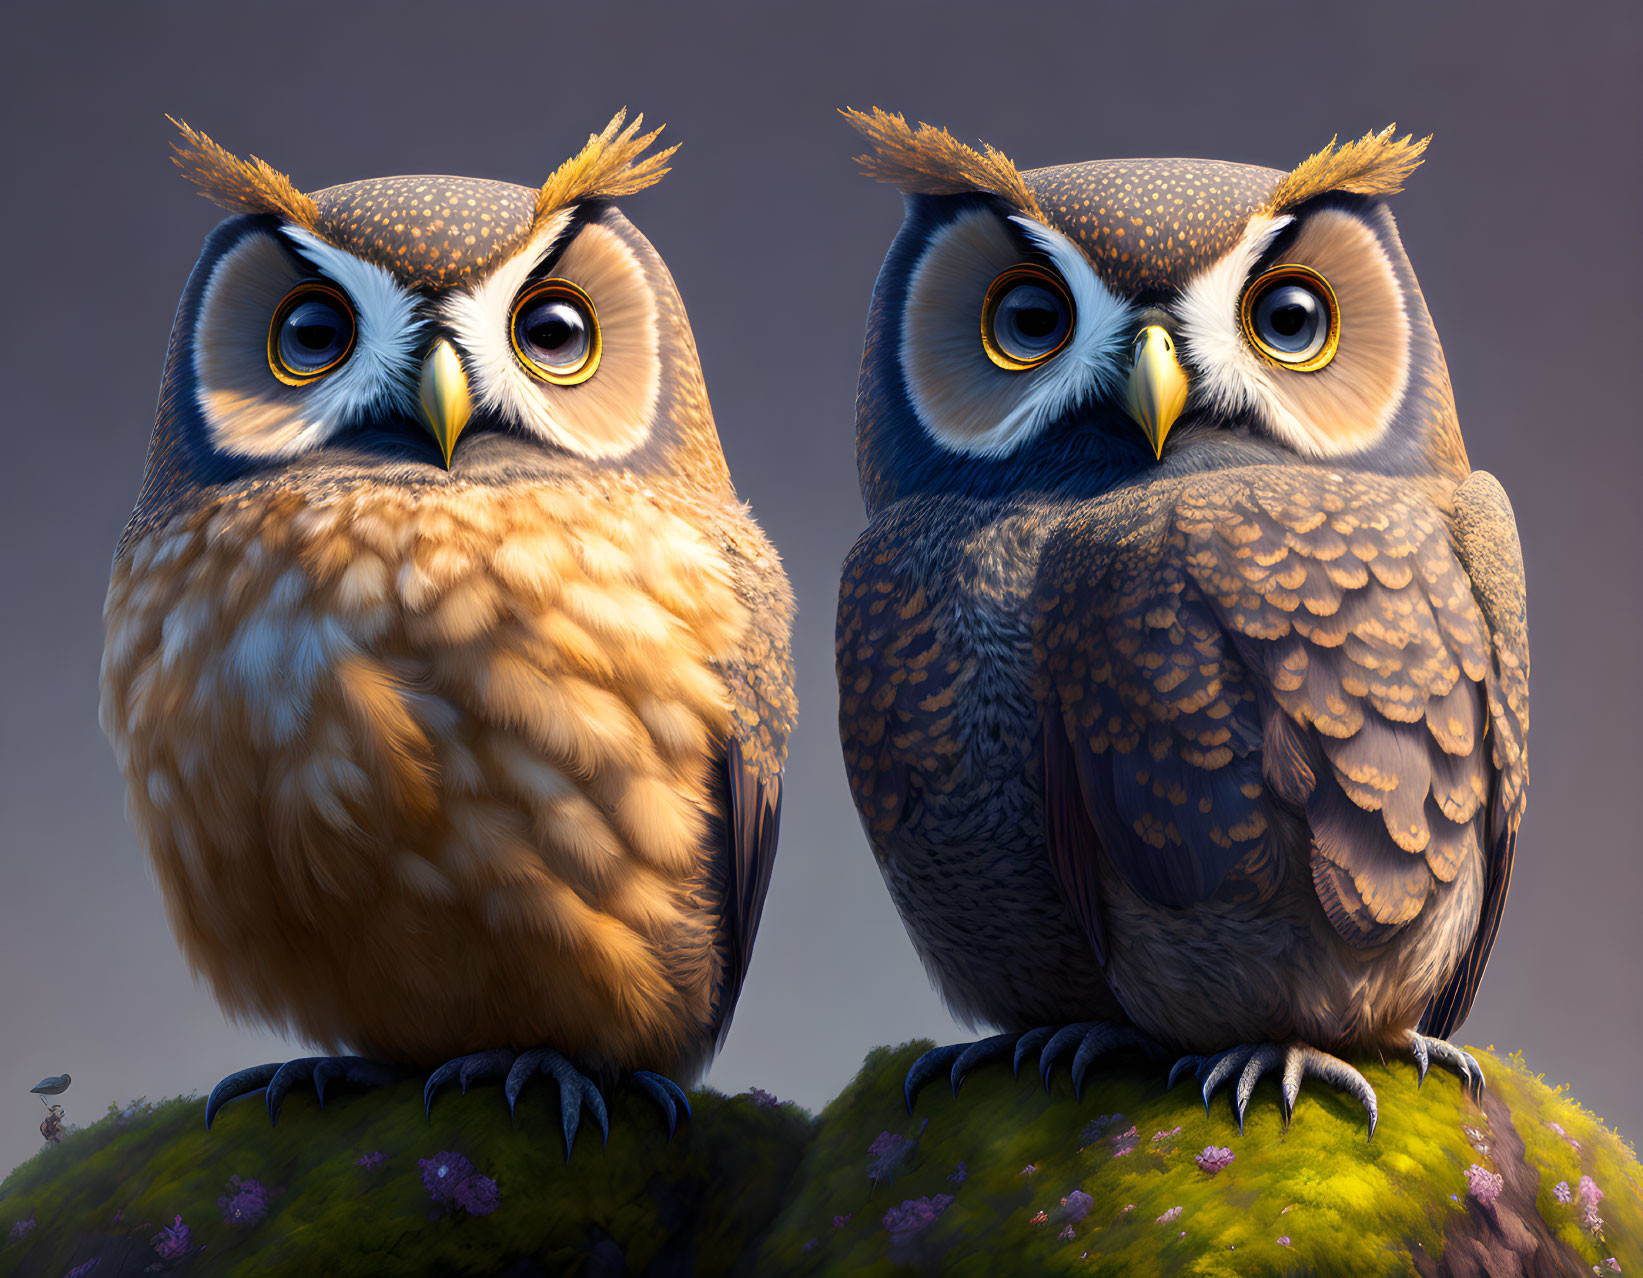 Colorful Cartoon Owls Perched on Mossy Rock